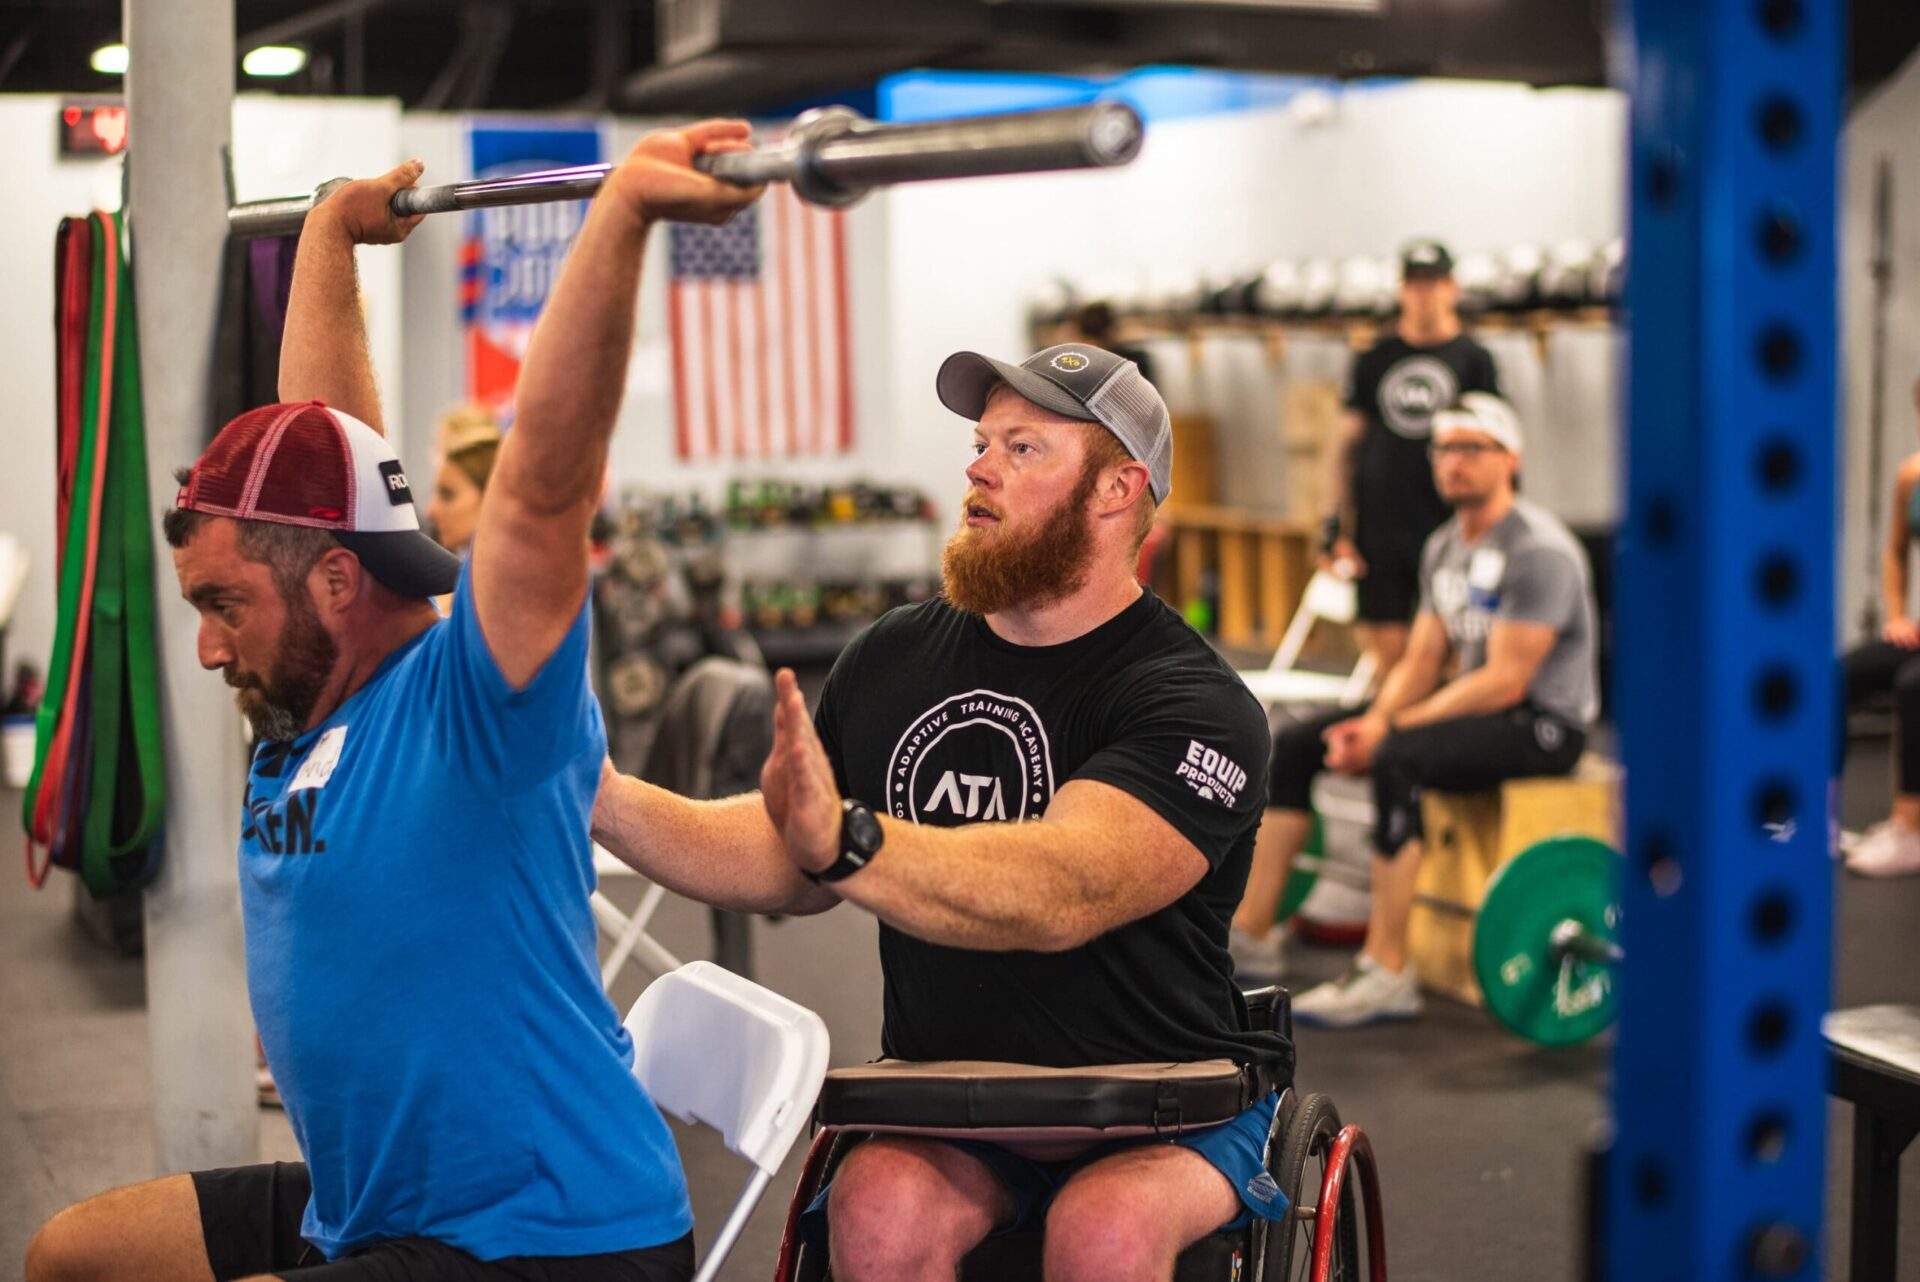 Adaptive coach Kevin Ogar trains abled-bodied and adaptive athletes.